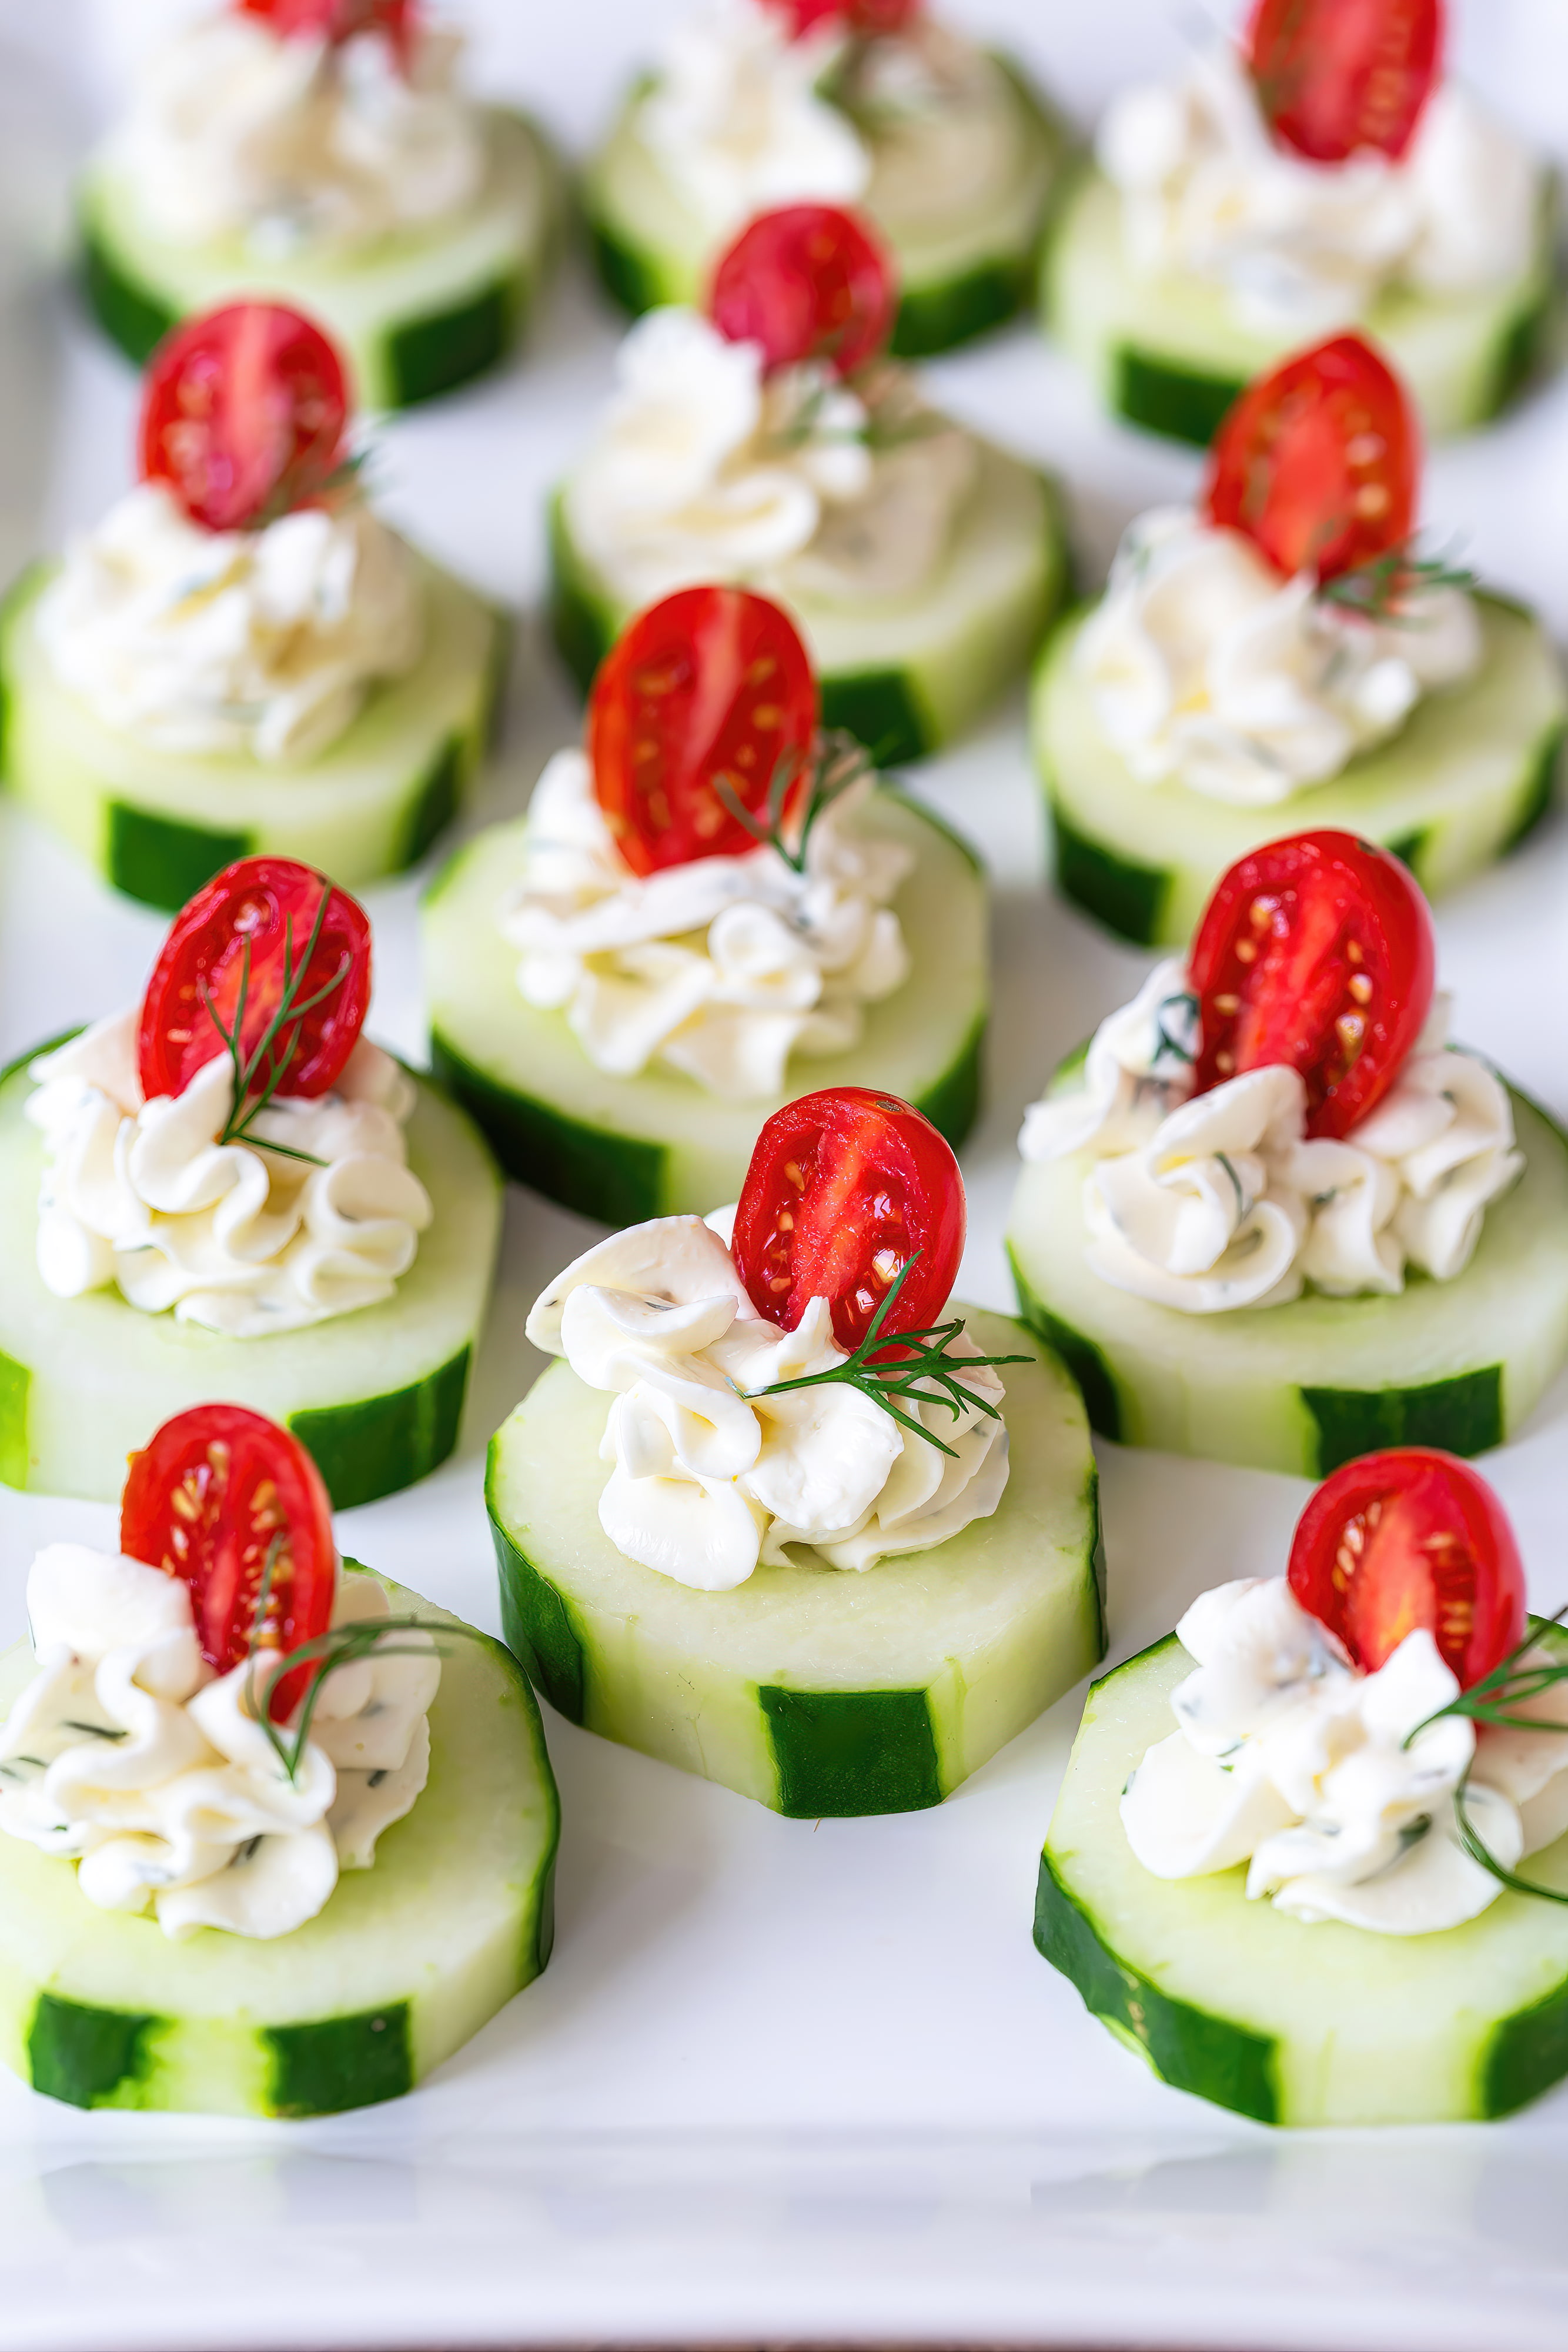 A white plate holds cucumber slices, cream cheese, and tomatoes arranged in a colorful and appetizing display